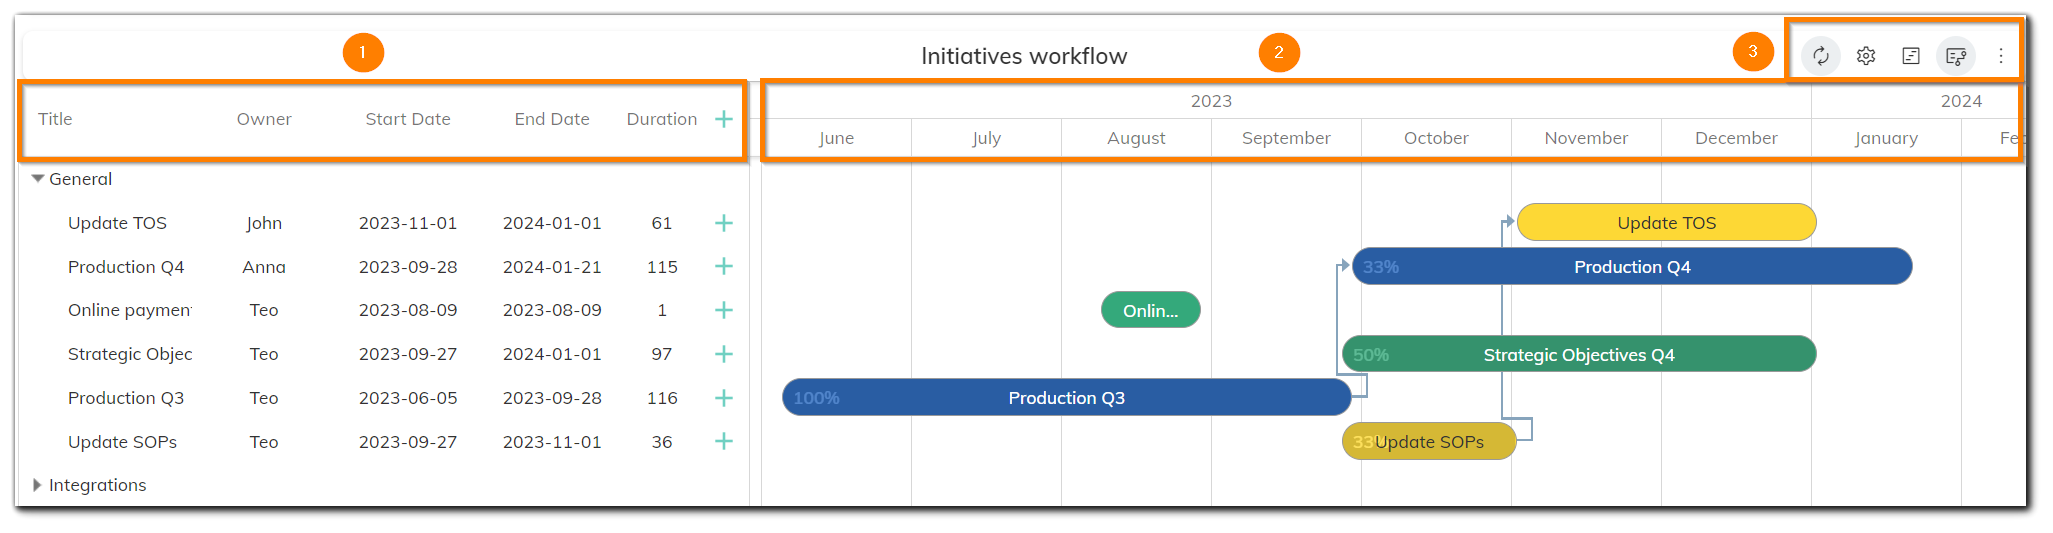 planning-view-elements-workflow.png